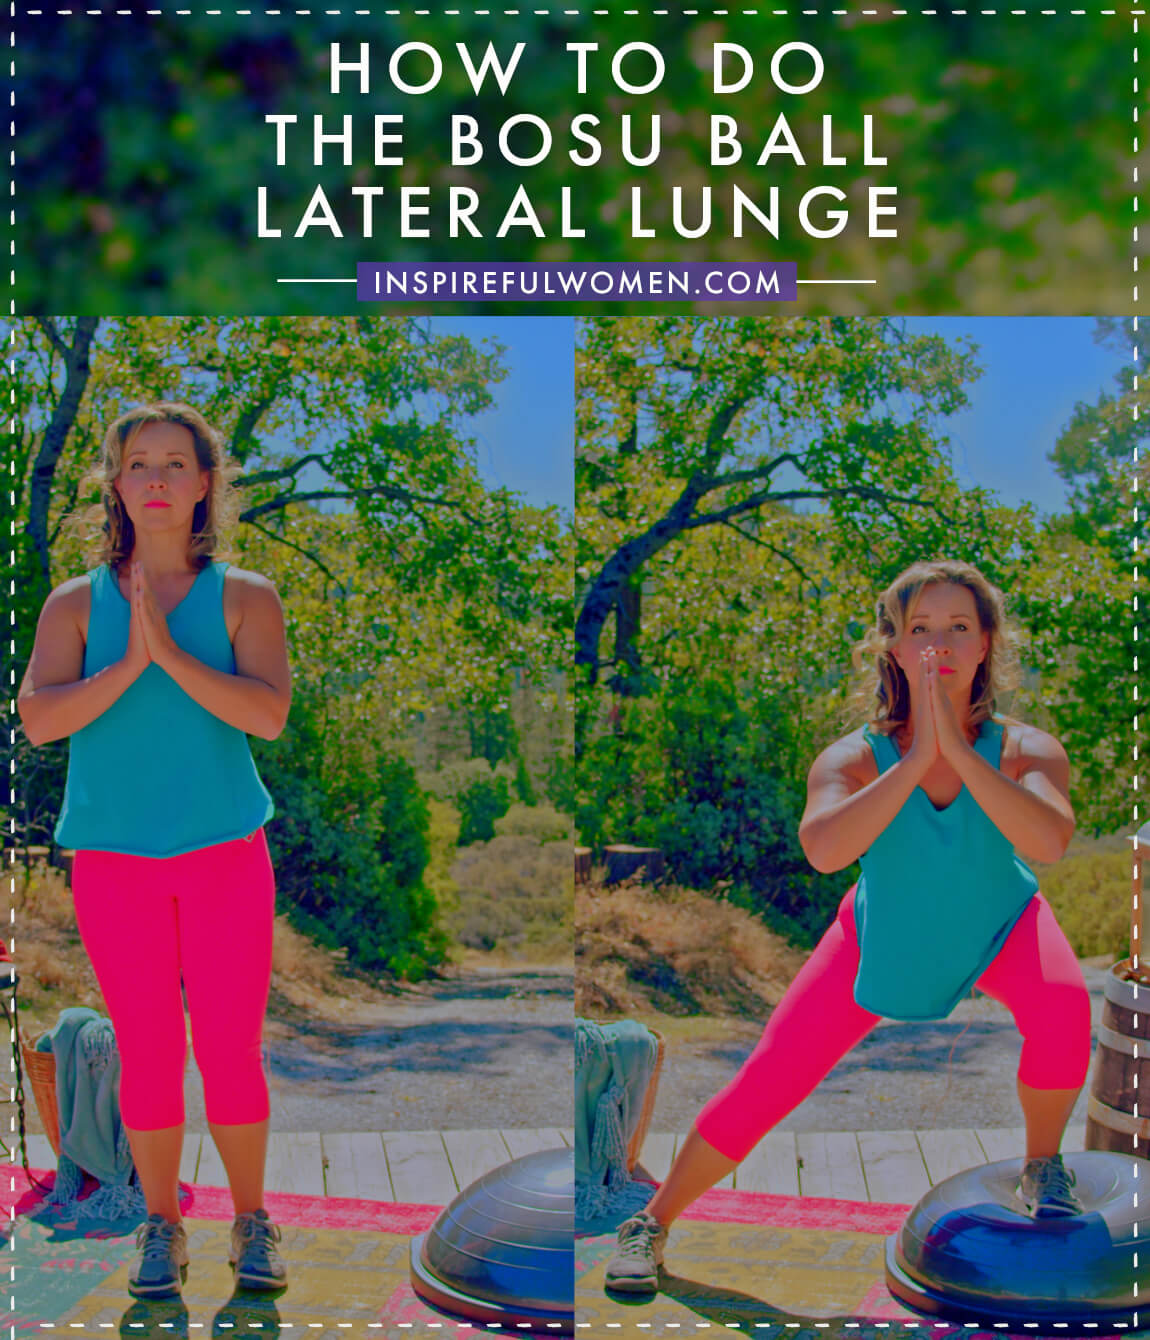 how-to-bosu-side-lateral-lunge-squat-alternative-inner-thigh-quadriceps-adductor-glutes-exercise-proper-form